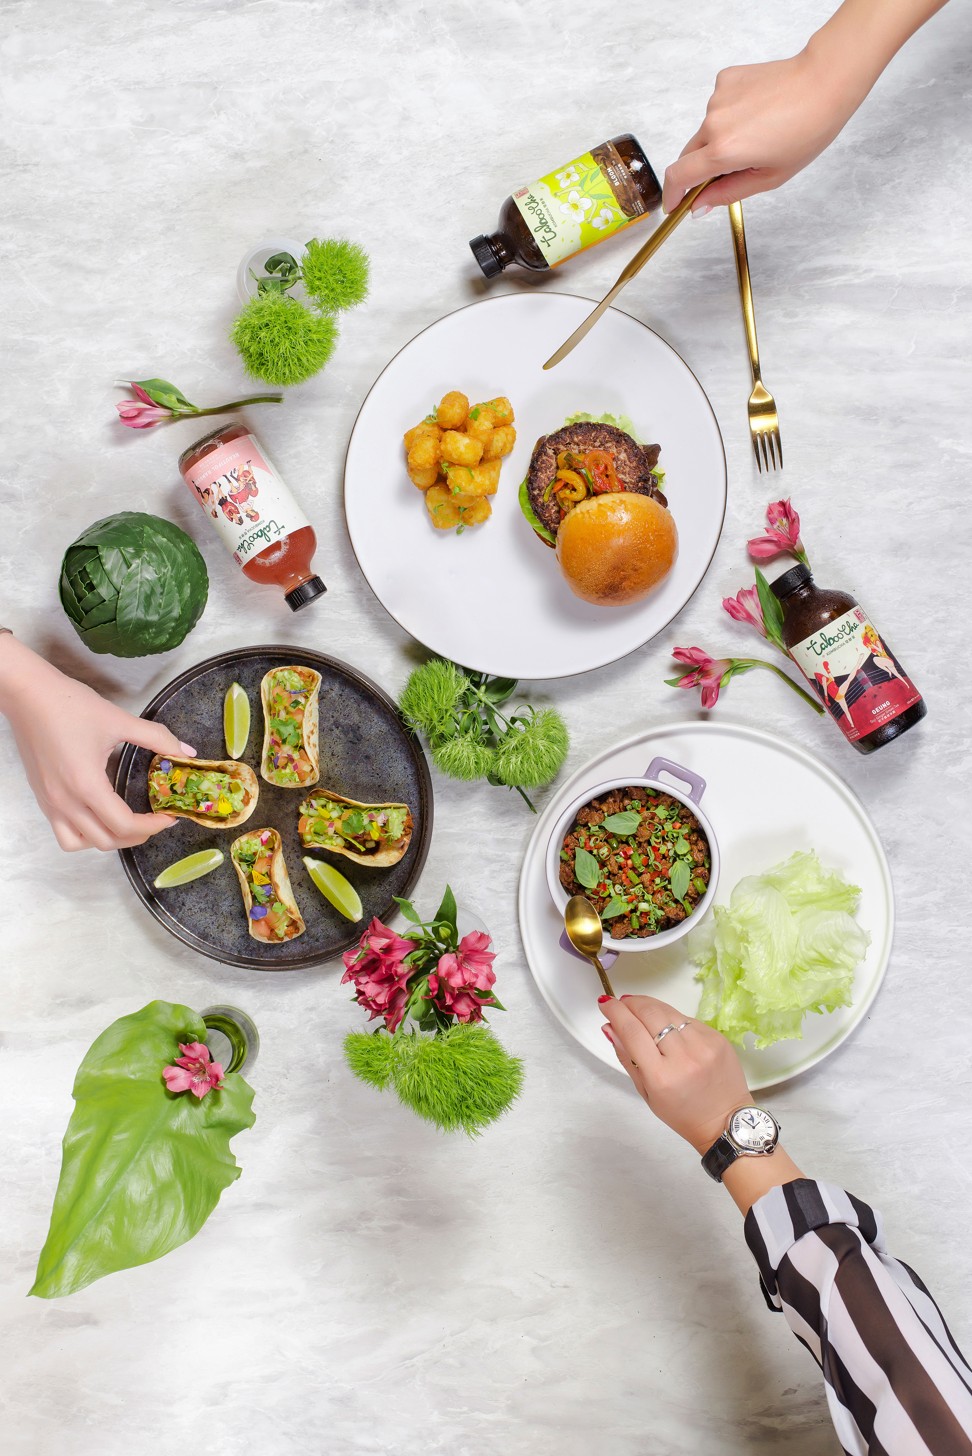 Galaxy Macau’s Cha Bei’s crunchy Texas tacos, Macanese burger and Thai lettuce wraps made with Impossible Foods’ plant-based ‘meat’.